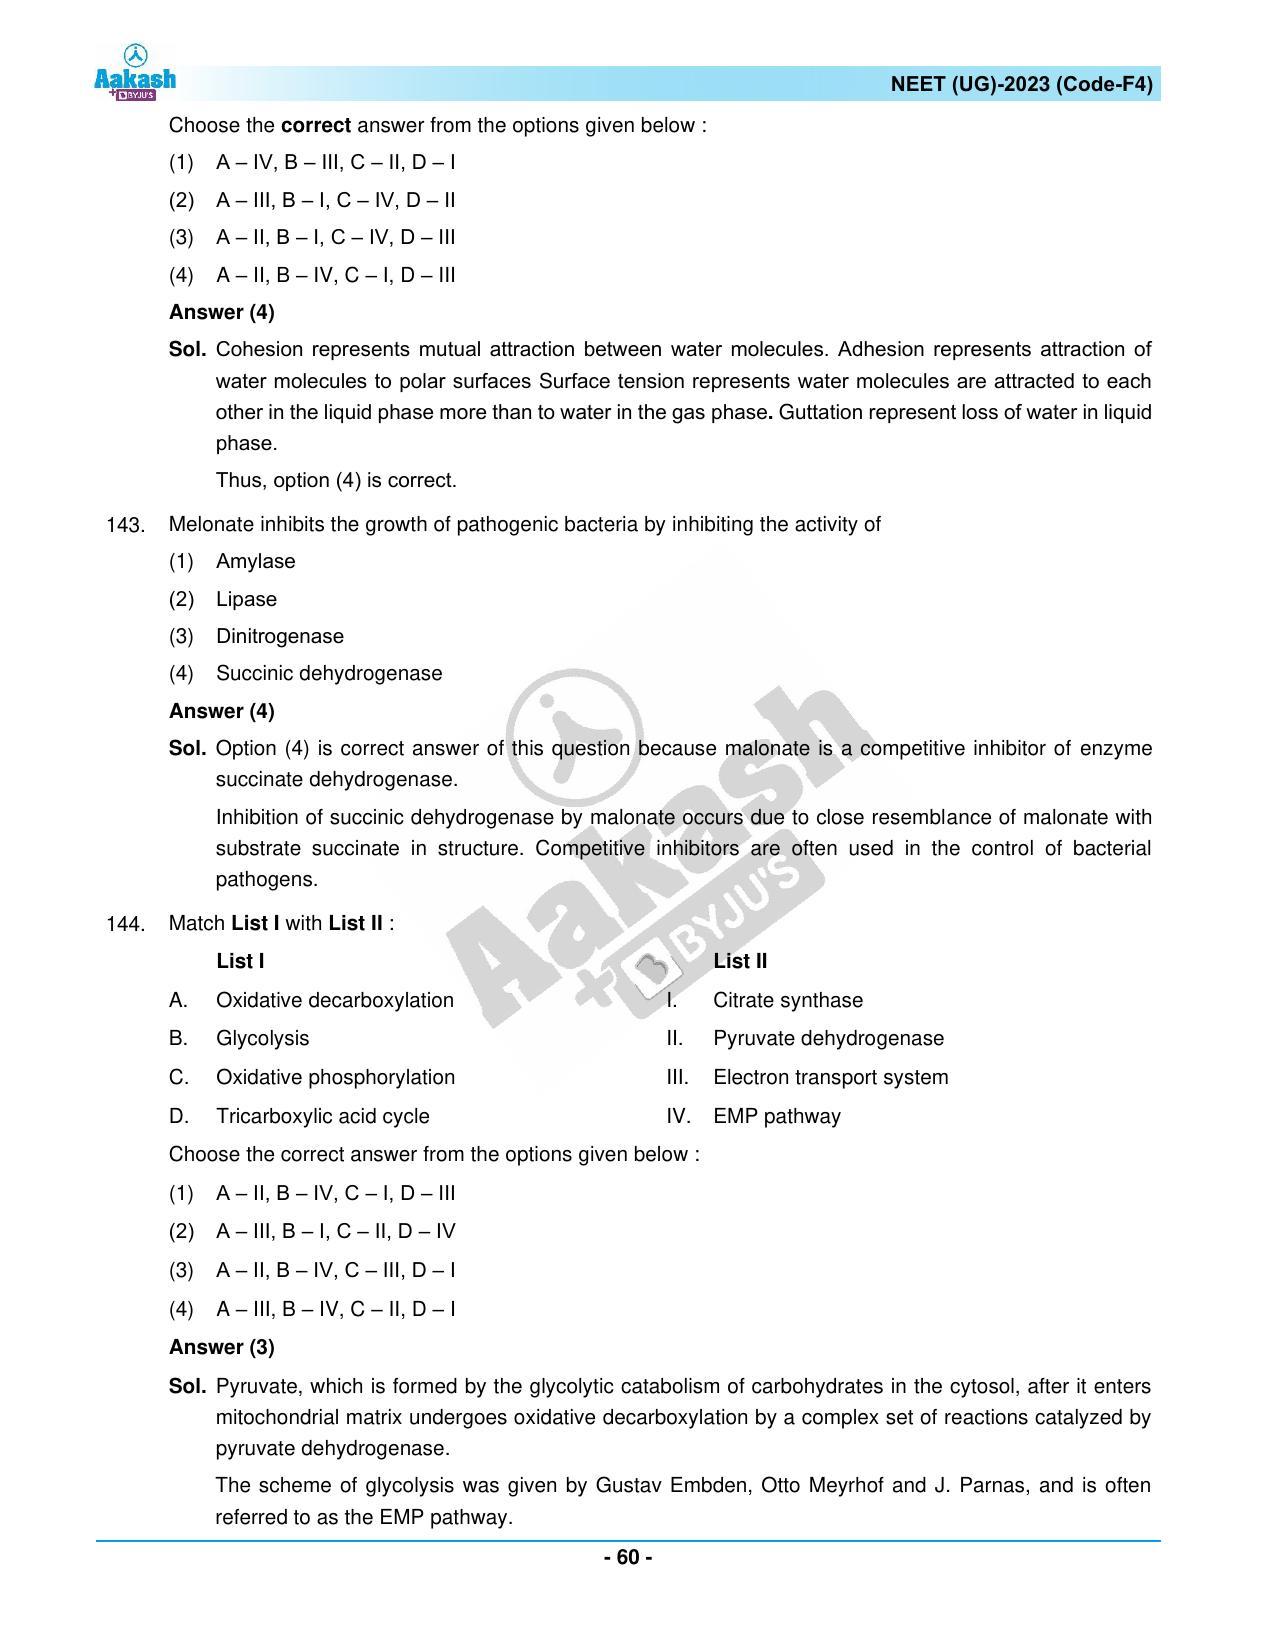 NEET 2023 Question Paper F4 - Page 60